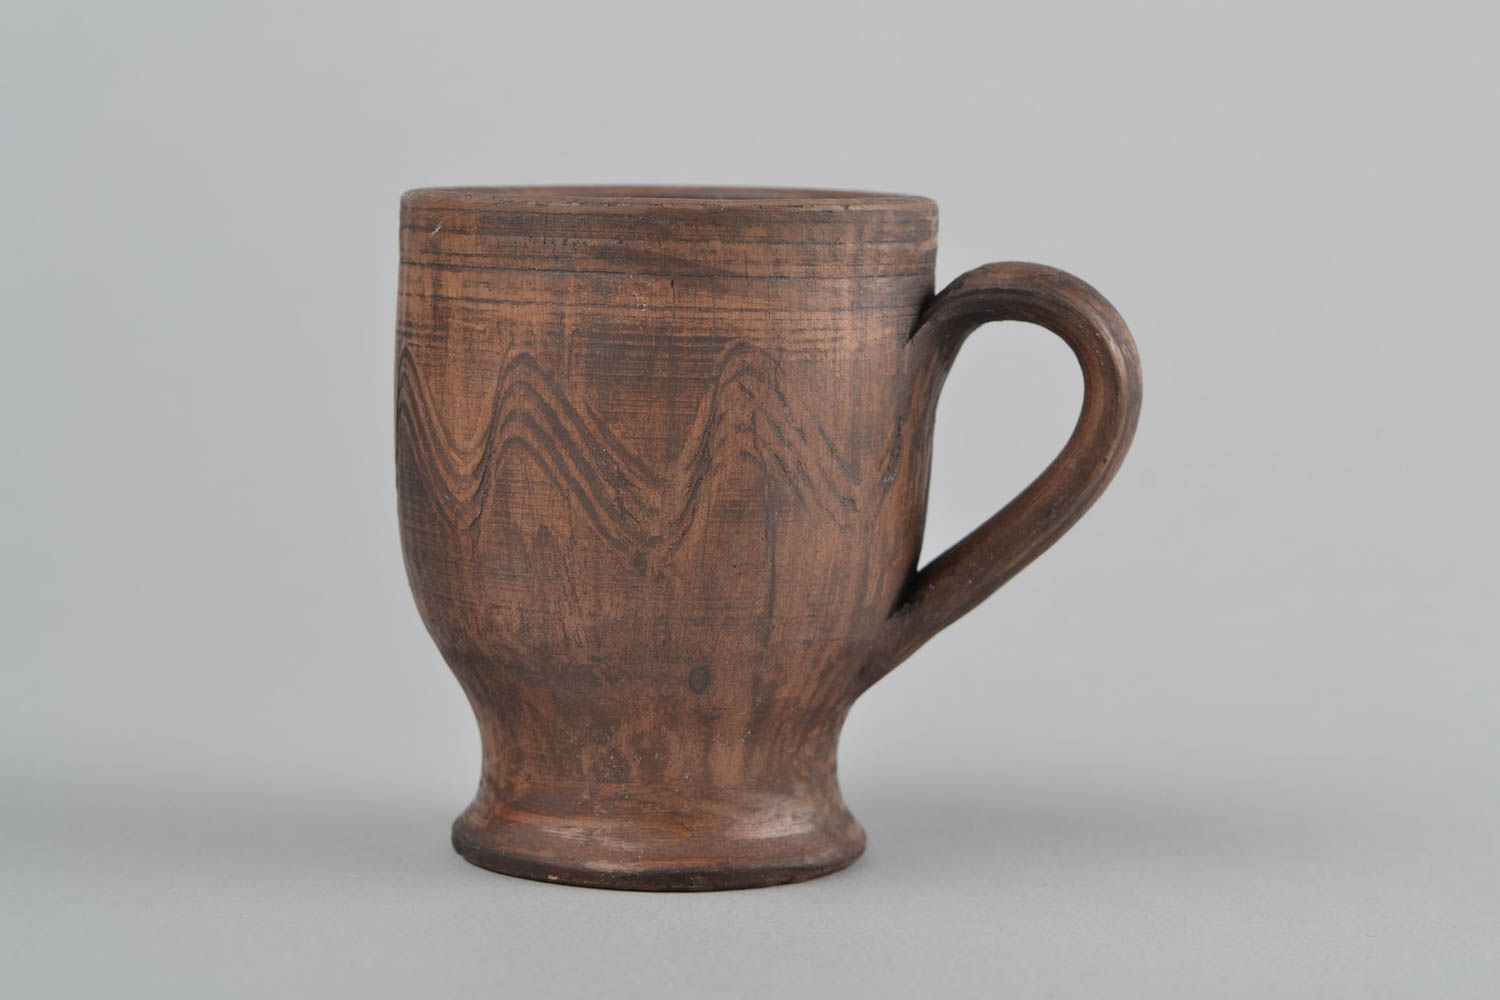 5 oz clay brown ceramic drinking cup on stand with handle and rustic style photo 5